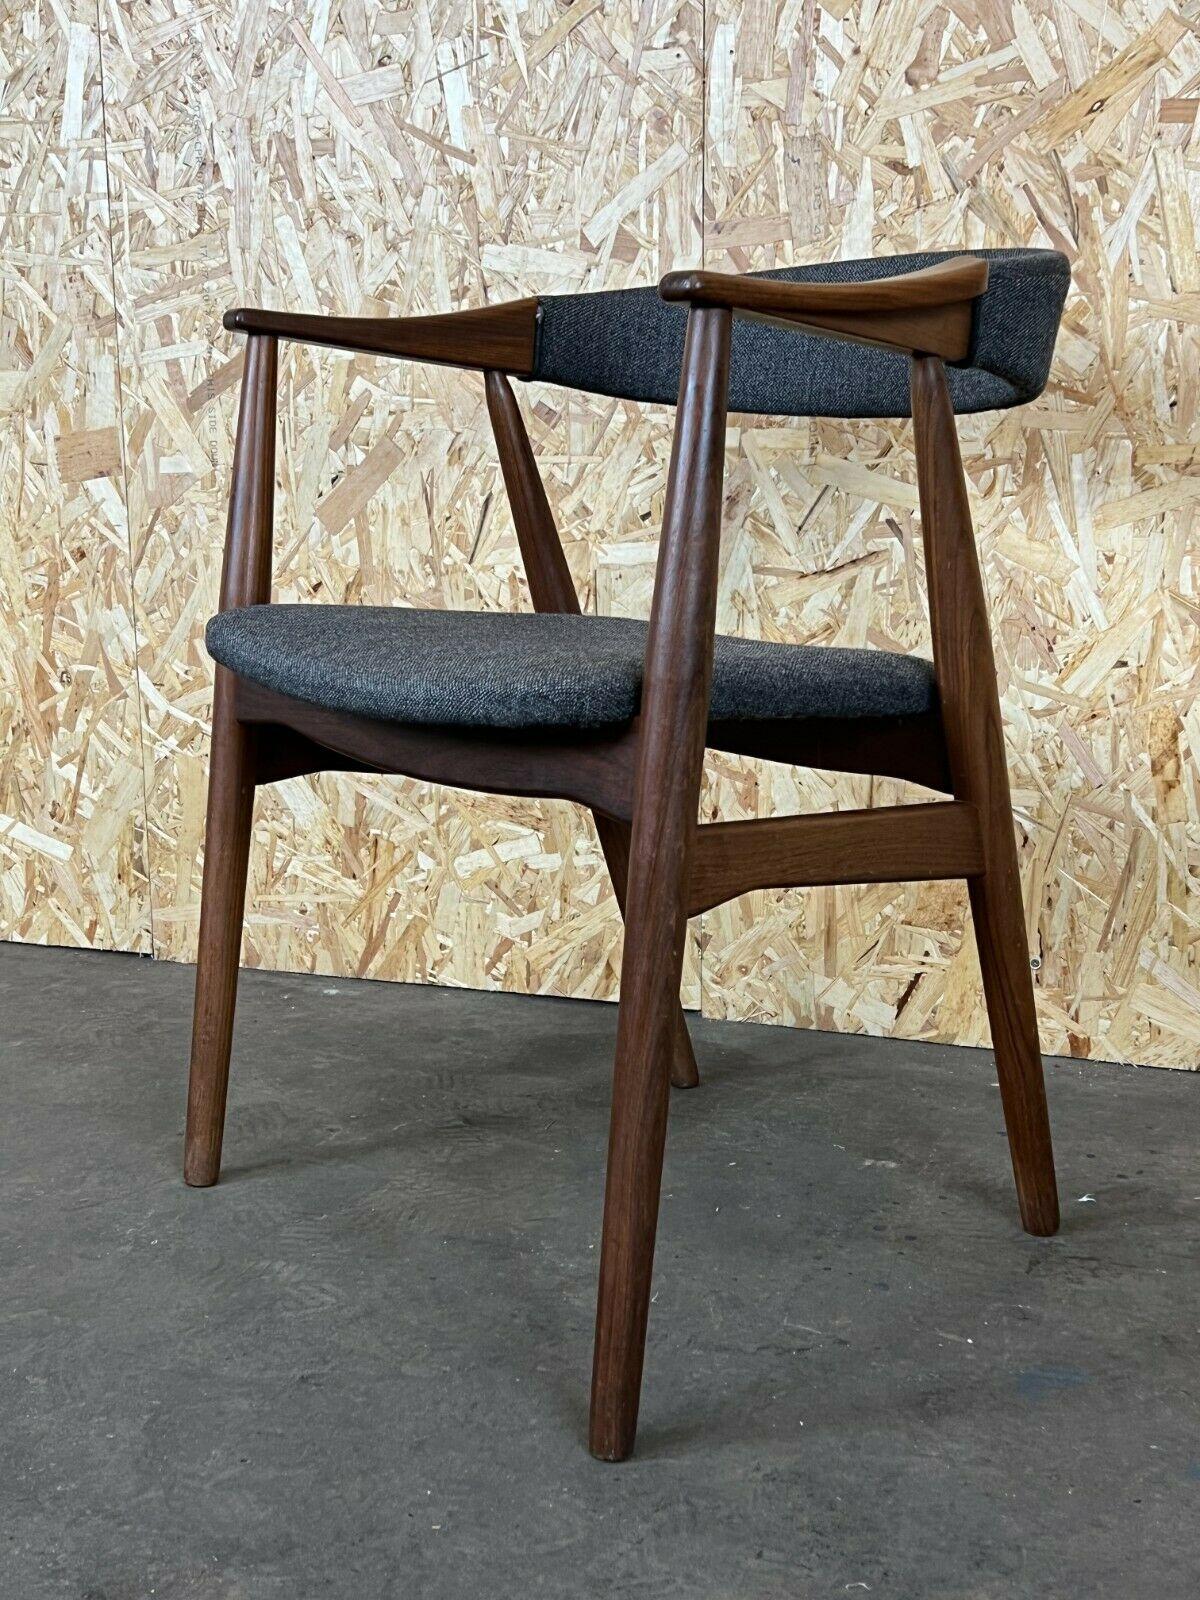 60s 70s teak armchair desk chair Th. Harlev for Farstrup 60s

Object: armchair

Manufacturer: Farstrup

Condition: good

Age: around 1960-1970

Dimensions:

55cm x 54cm x 71cm
Seat height = 44cm

Other notes:

The pictures serve as